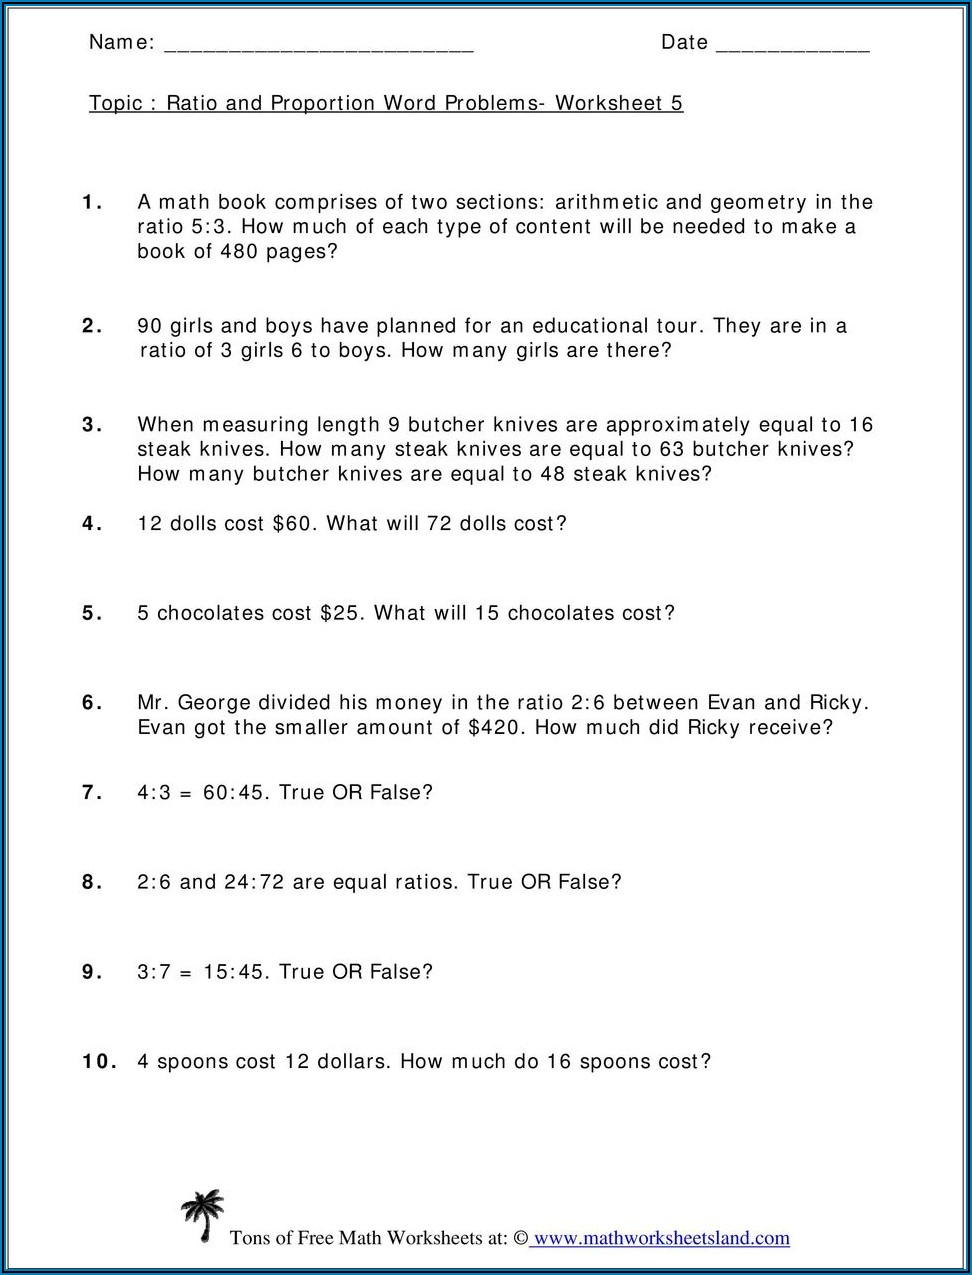 Ratio And Proportion Word Problems Worksheet Doc